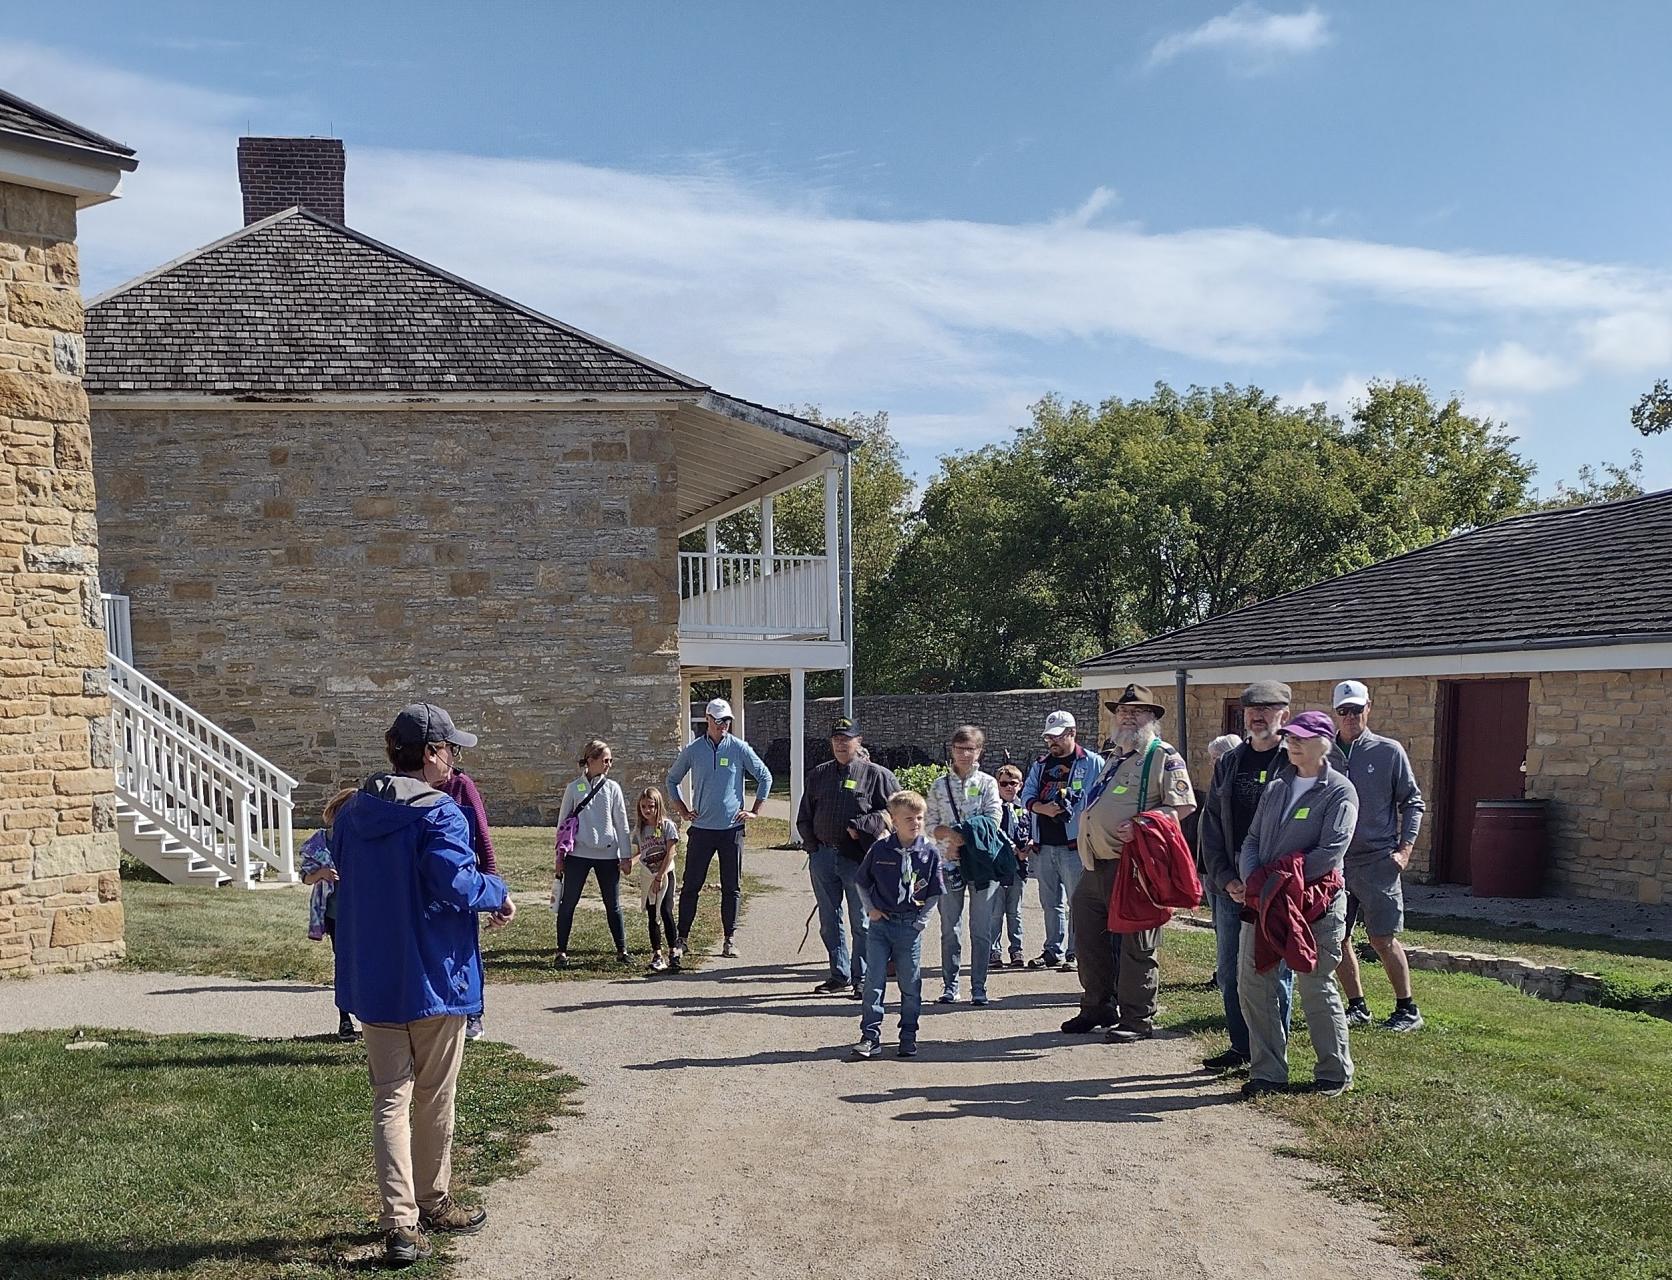 A tour guide leads a group through the Historic Fort Snelling grounds.